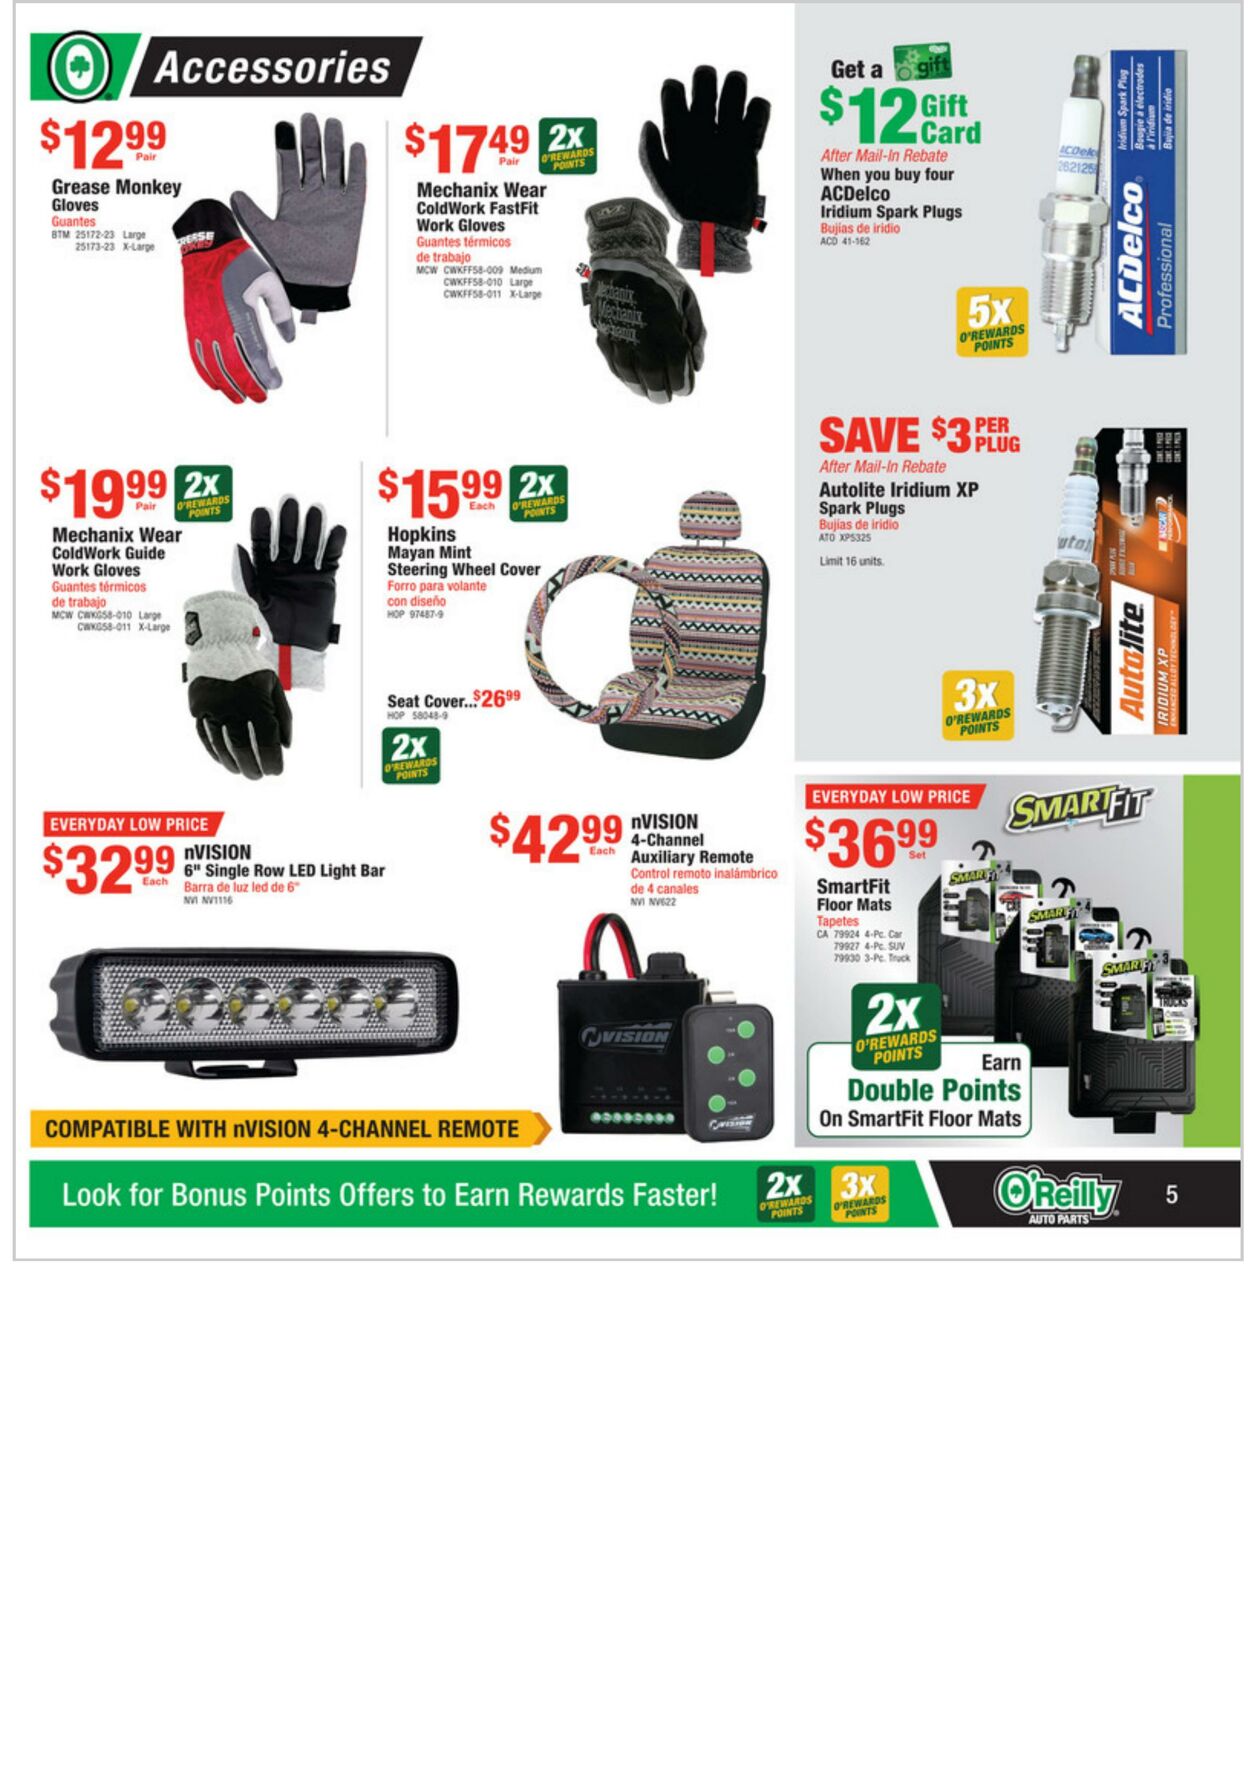 Weekly ad O’Reilly Auto Parts 12/29/2021 - 01/25/2022